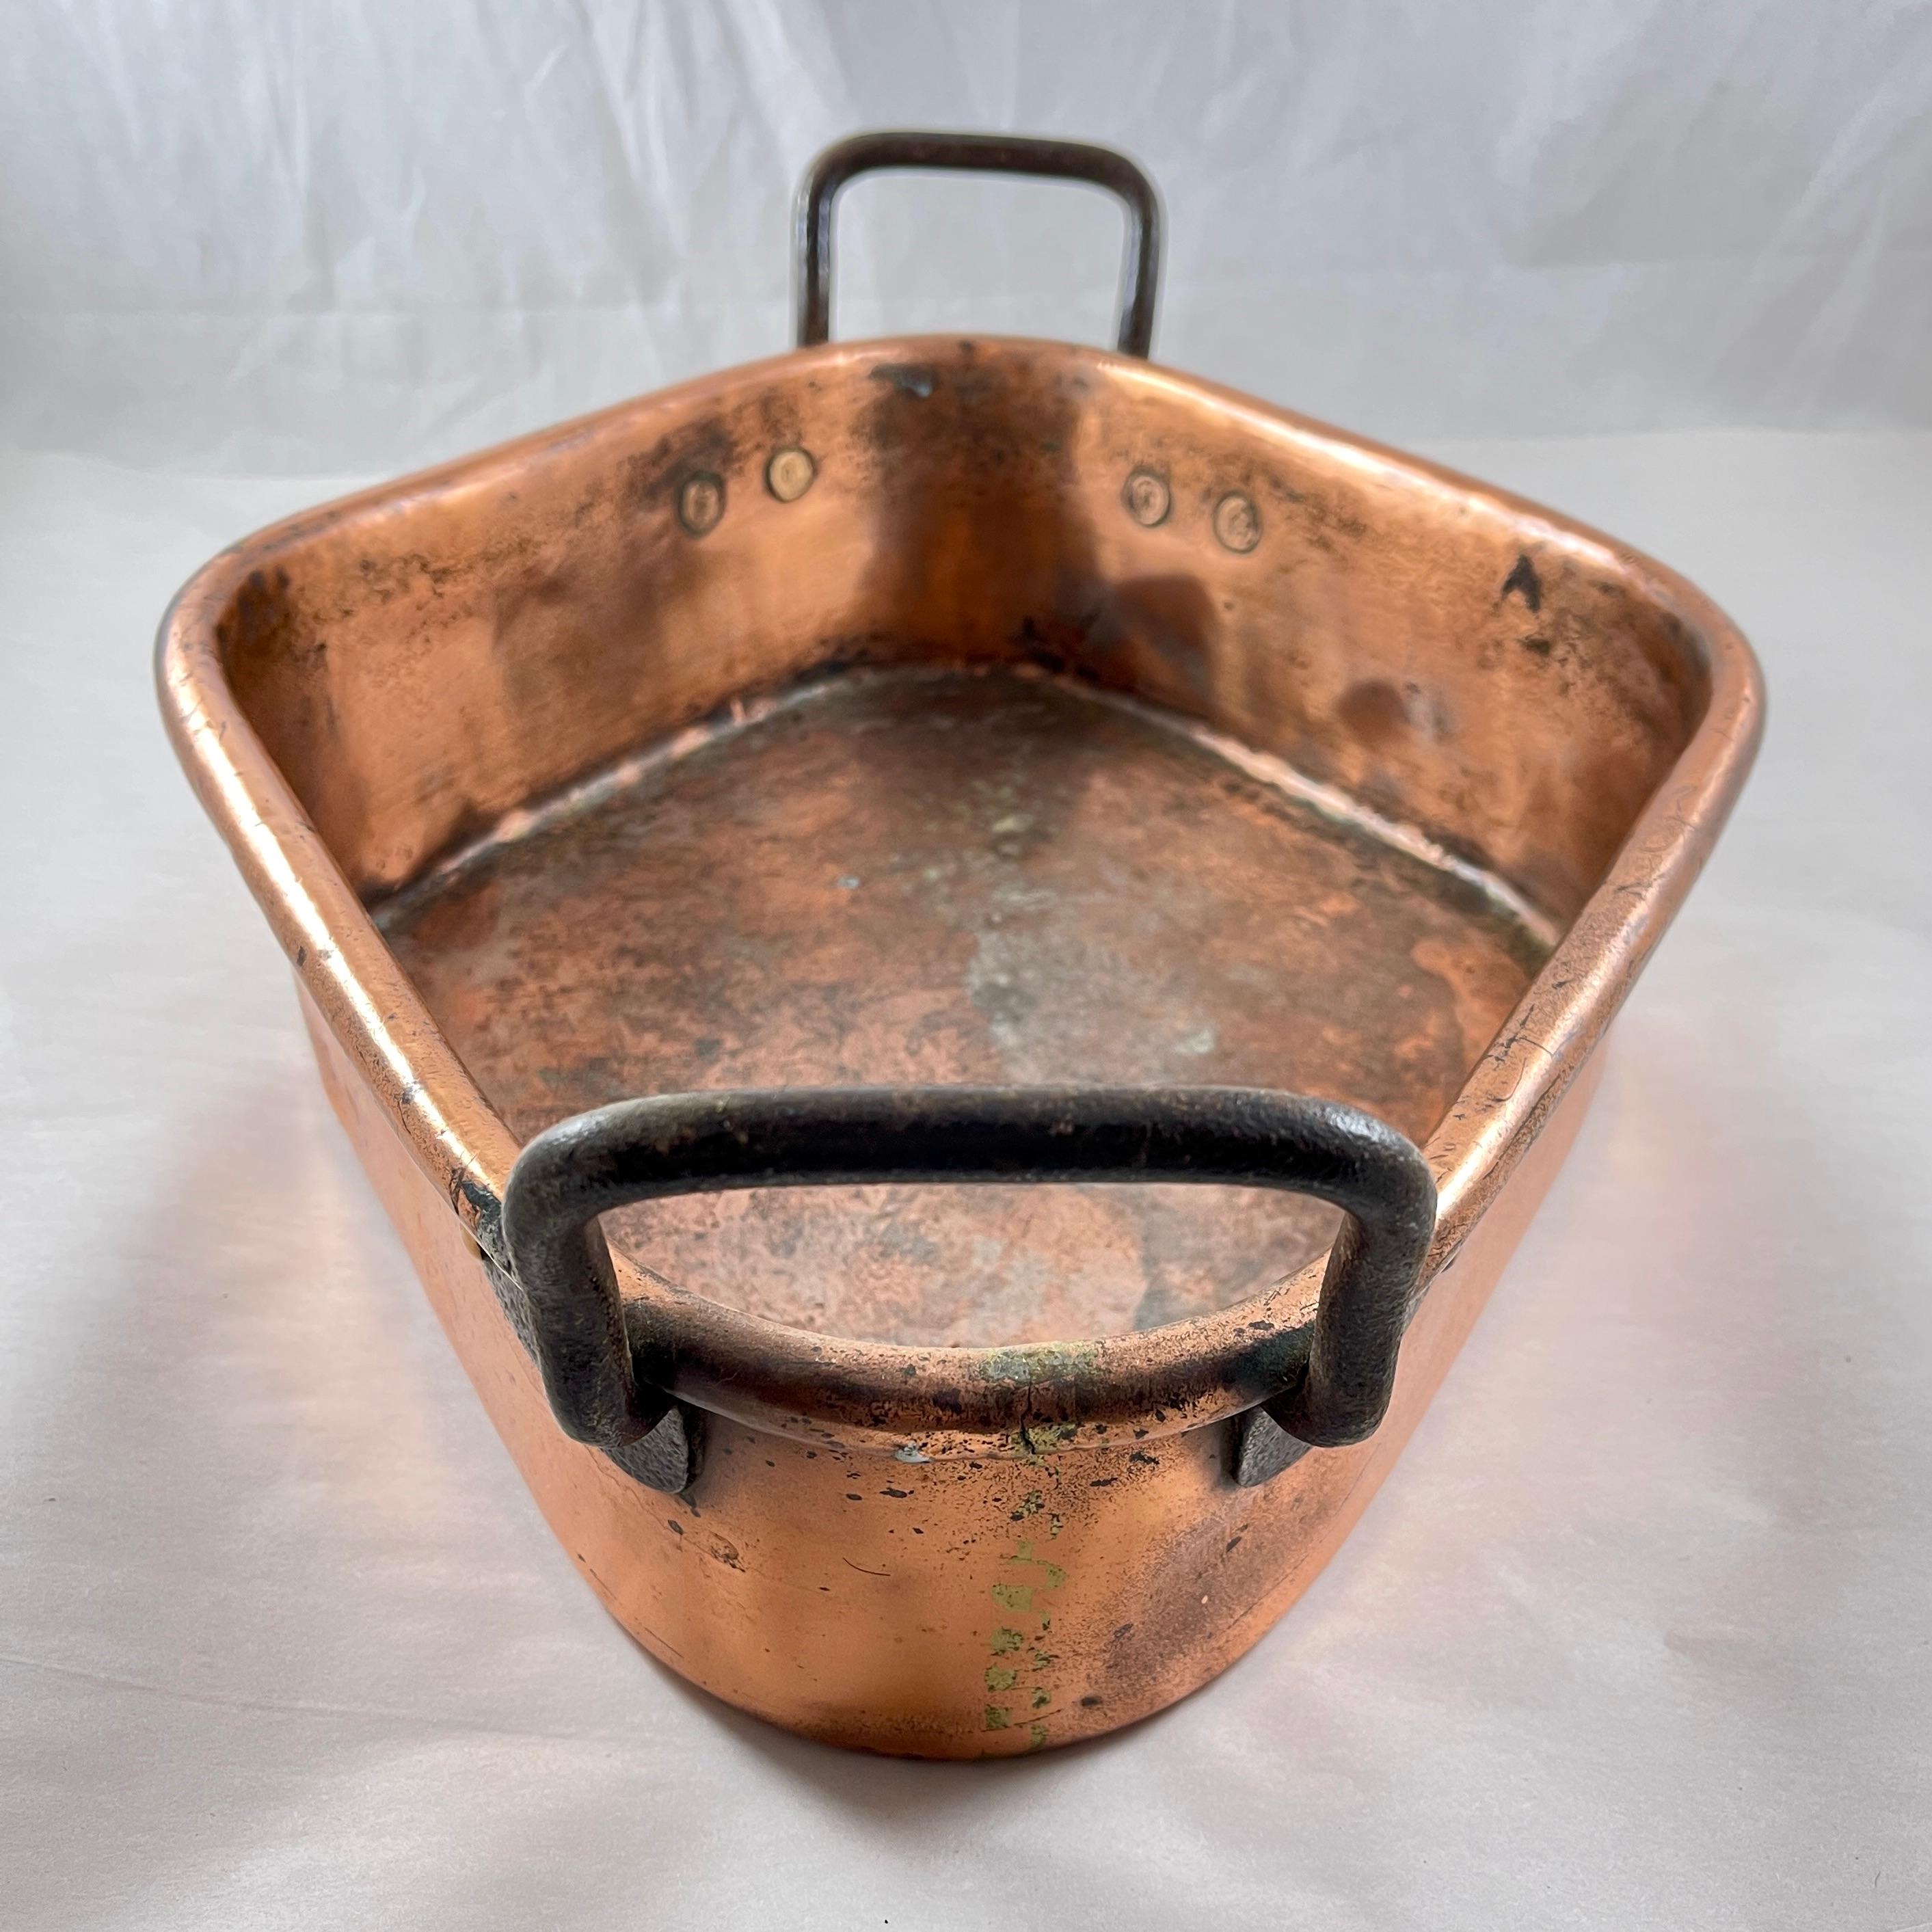 Rustic Country French Copper & Iron Handled Turbotiere Fish Poacher, c. 1850 For Sale 1